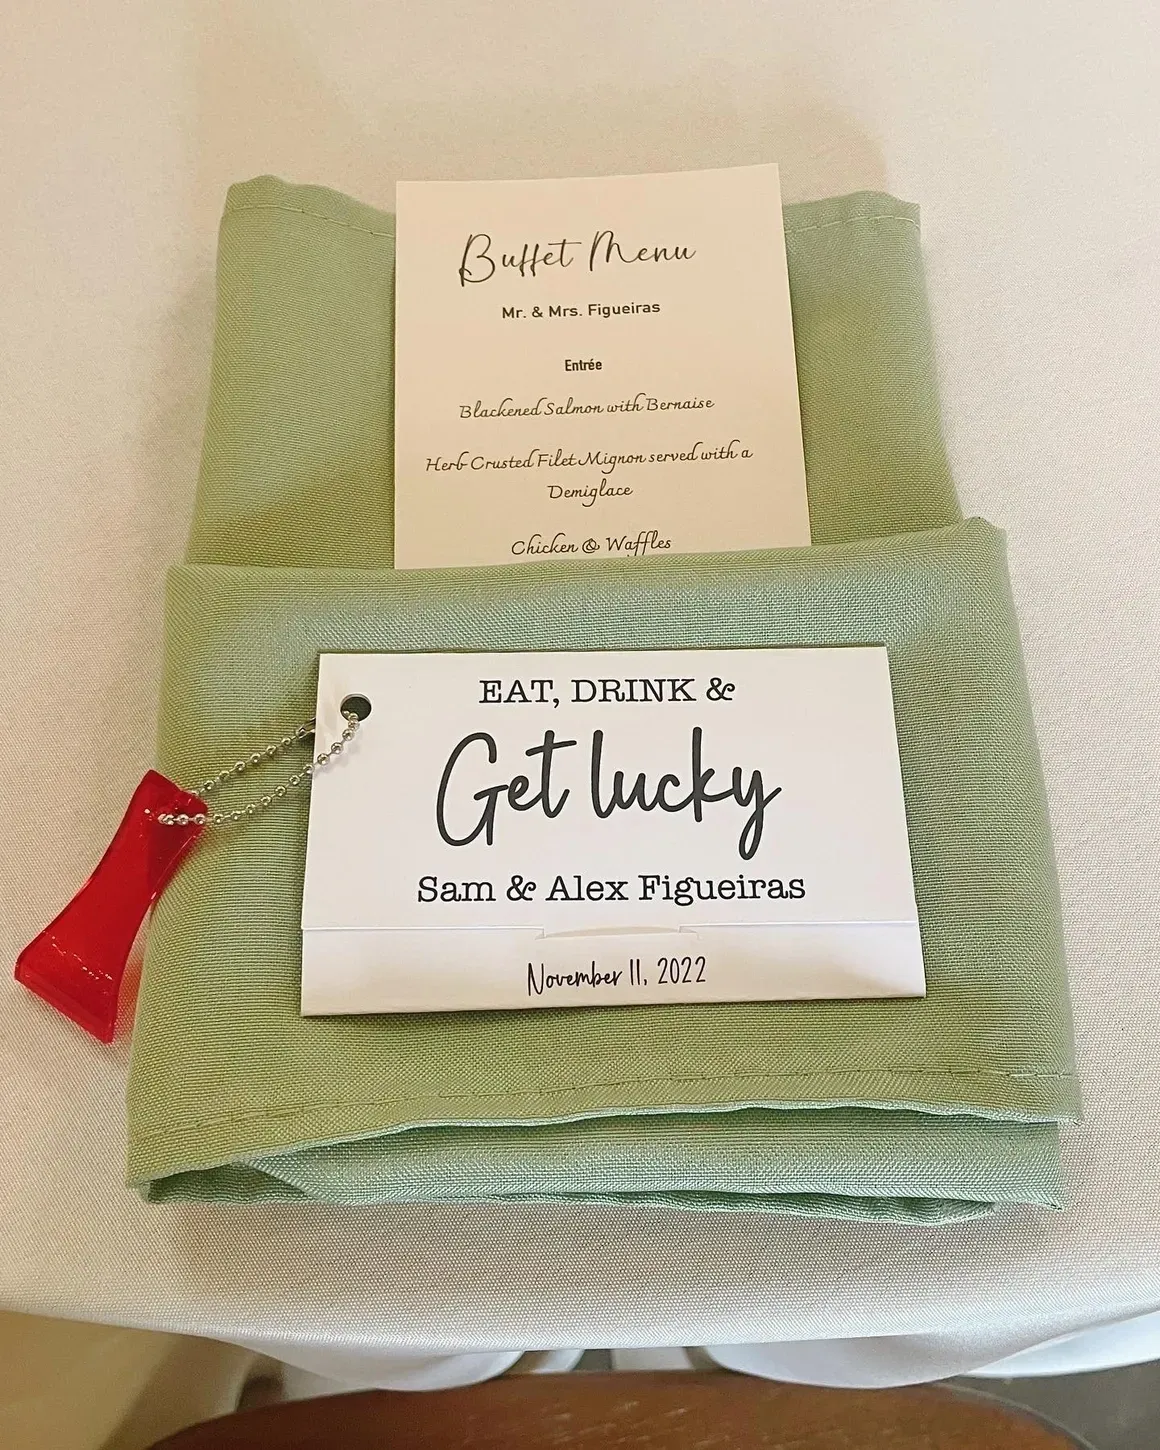 A green napkin with a card and some other things